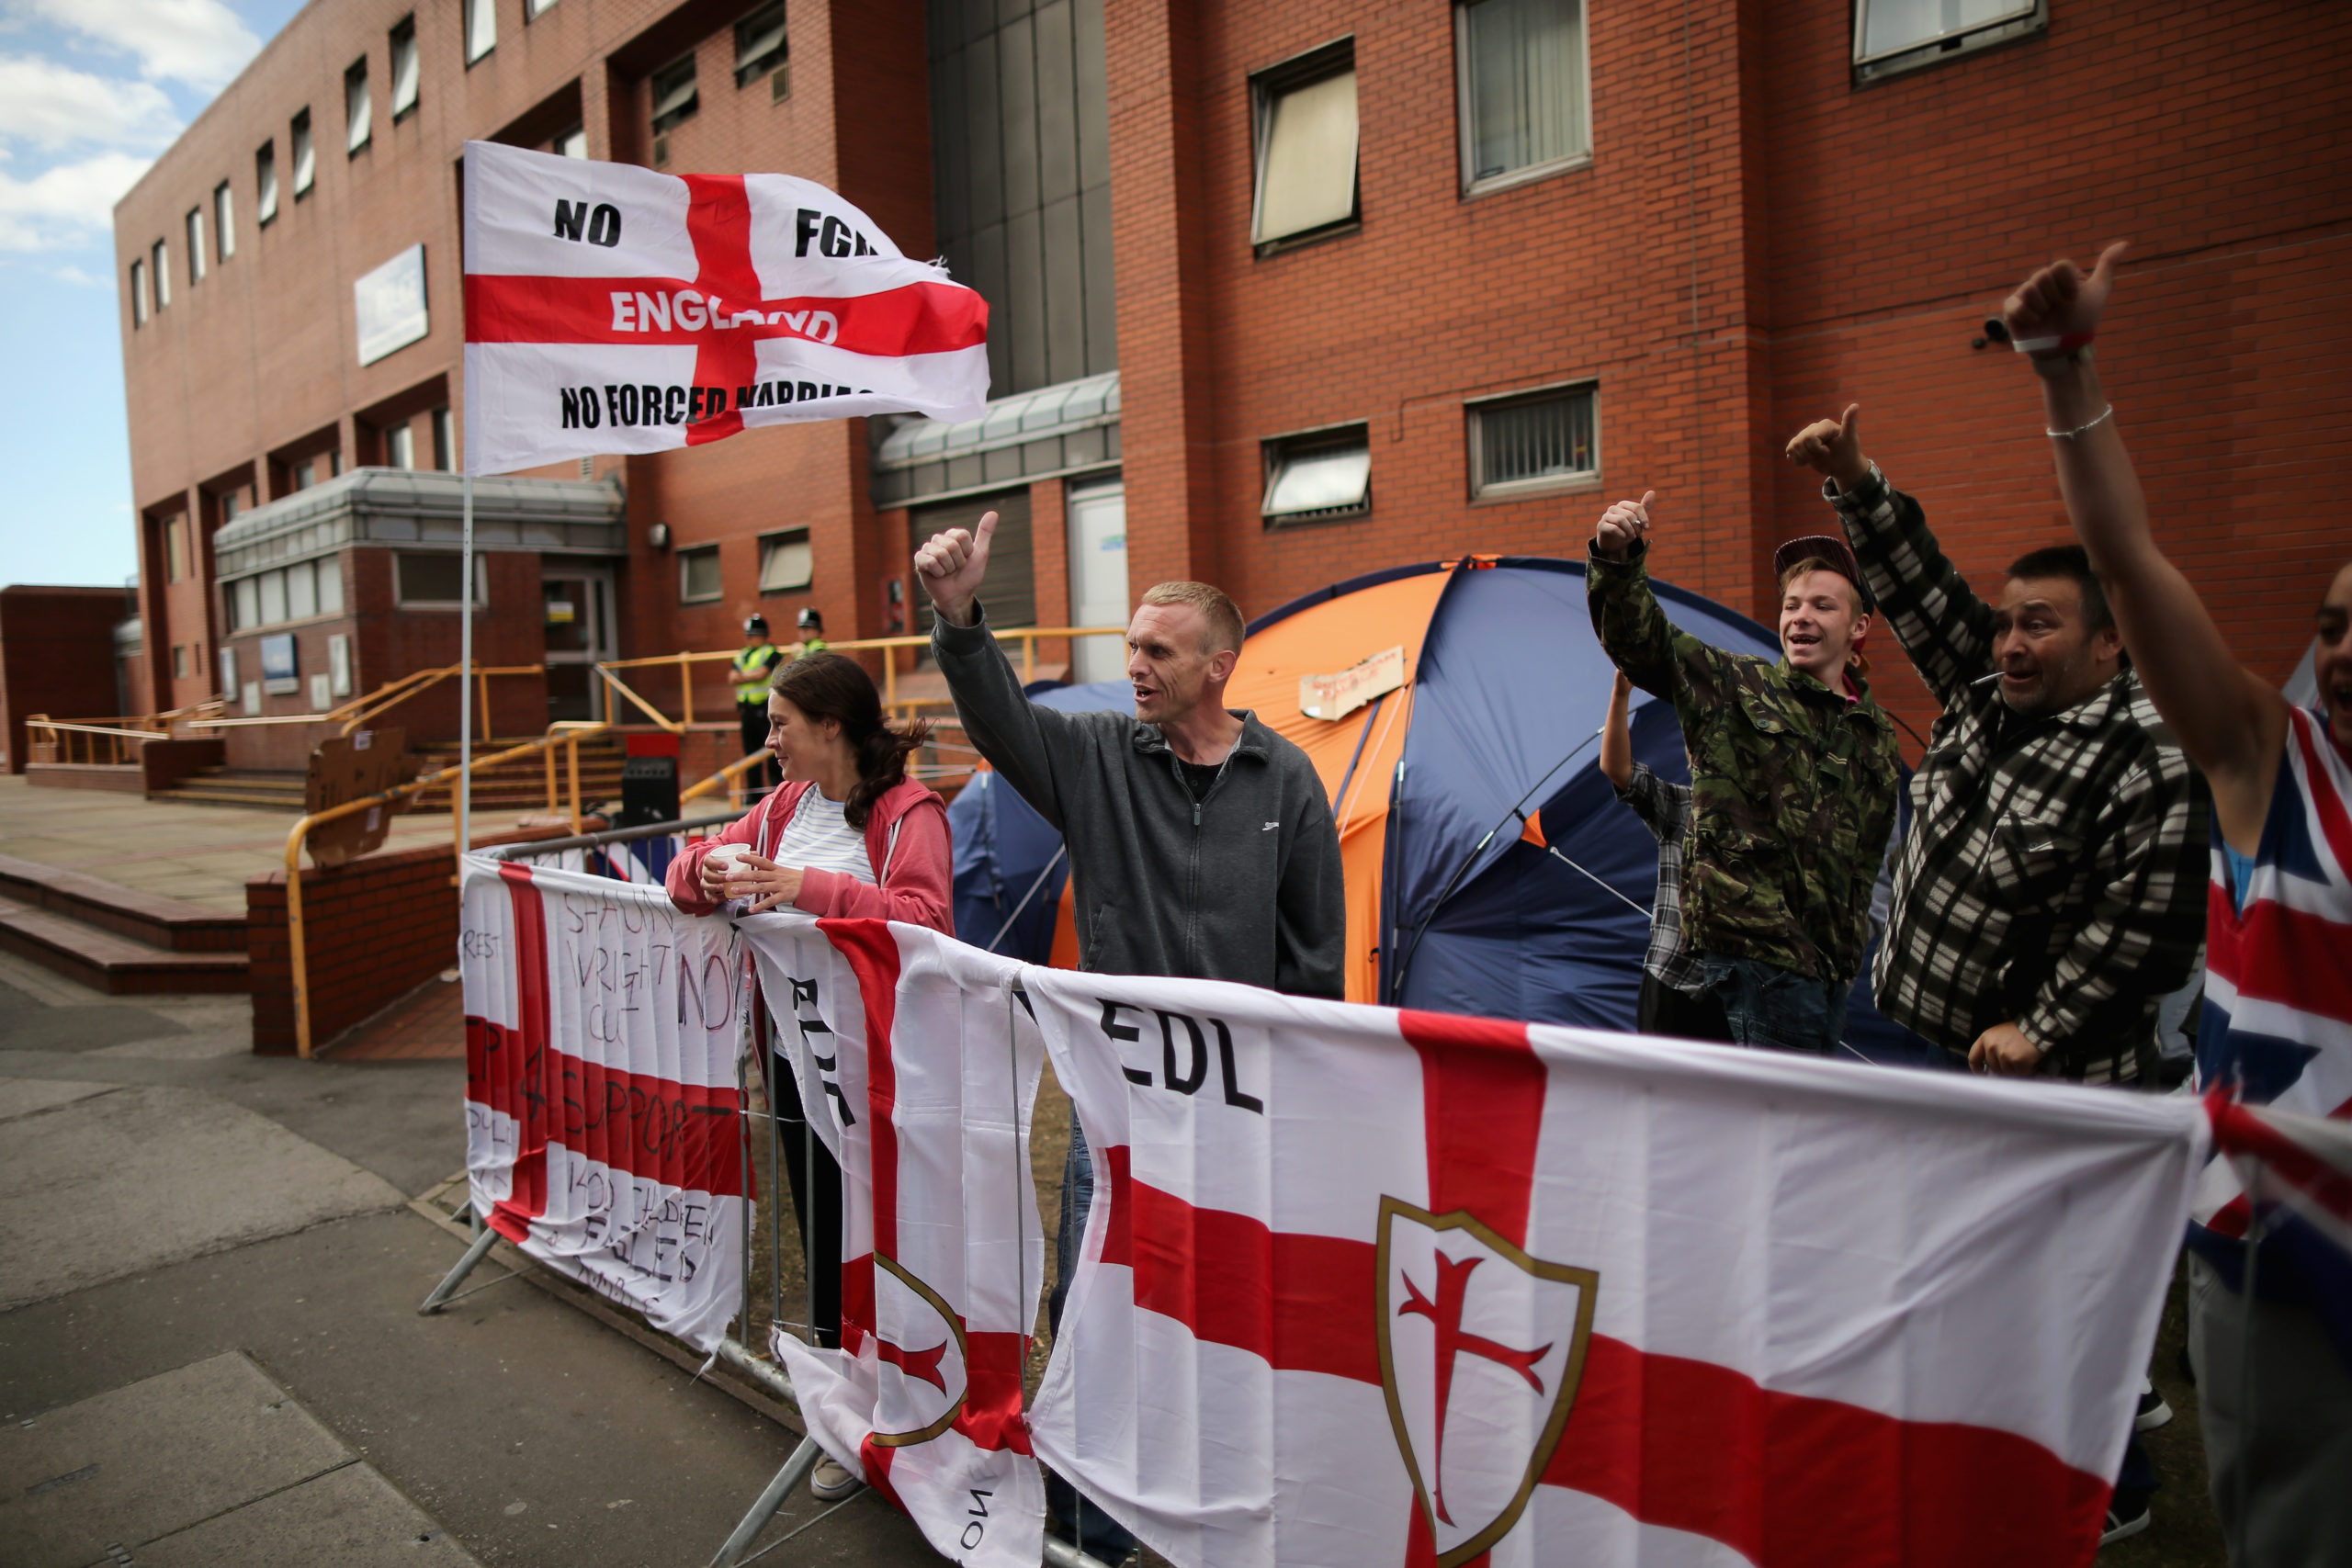 ROTHERHAM, ENGLAND - SEPTEMBER 01: Members of the EDL (English Defence League) hold a demonstration calling for the resignation of South Yorkshire Police and Crime Commissioner Shaun Wright outside the police station on September 1, 2014 in Rotherham, England. South Yorkshire Police are launching an independent investigation into its handling of the Rotherham child abuse scandal and will also probe the role of public bodies and council workers. A report claims at least 1,400 children as young as 11 were sexually abused from 1997- 2013 in Rotherham Care Homes but no council staff will face disciplinary action. (Photo by Christopher Furlong/Getty Images)